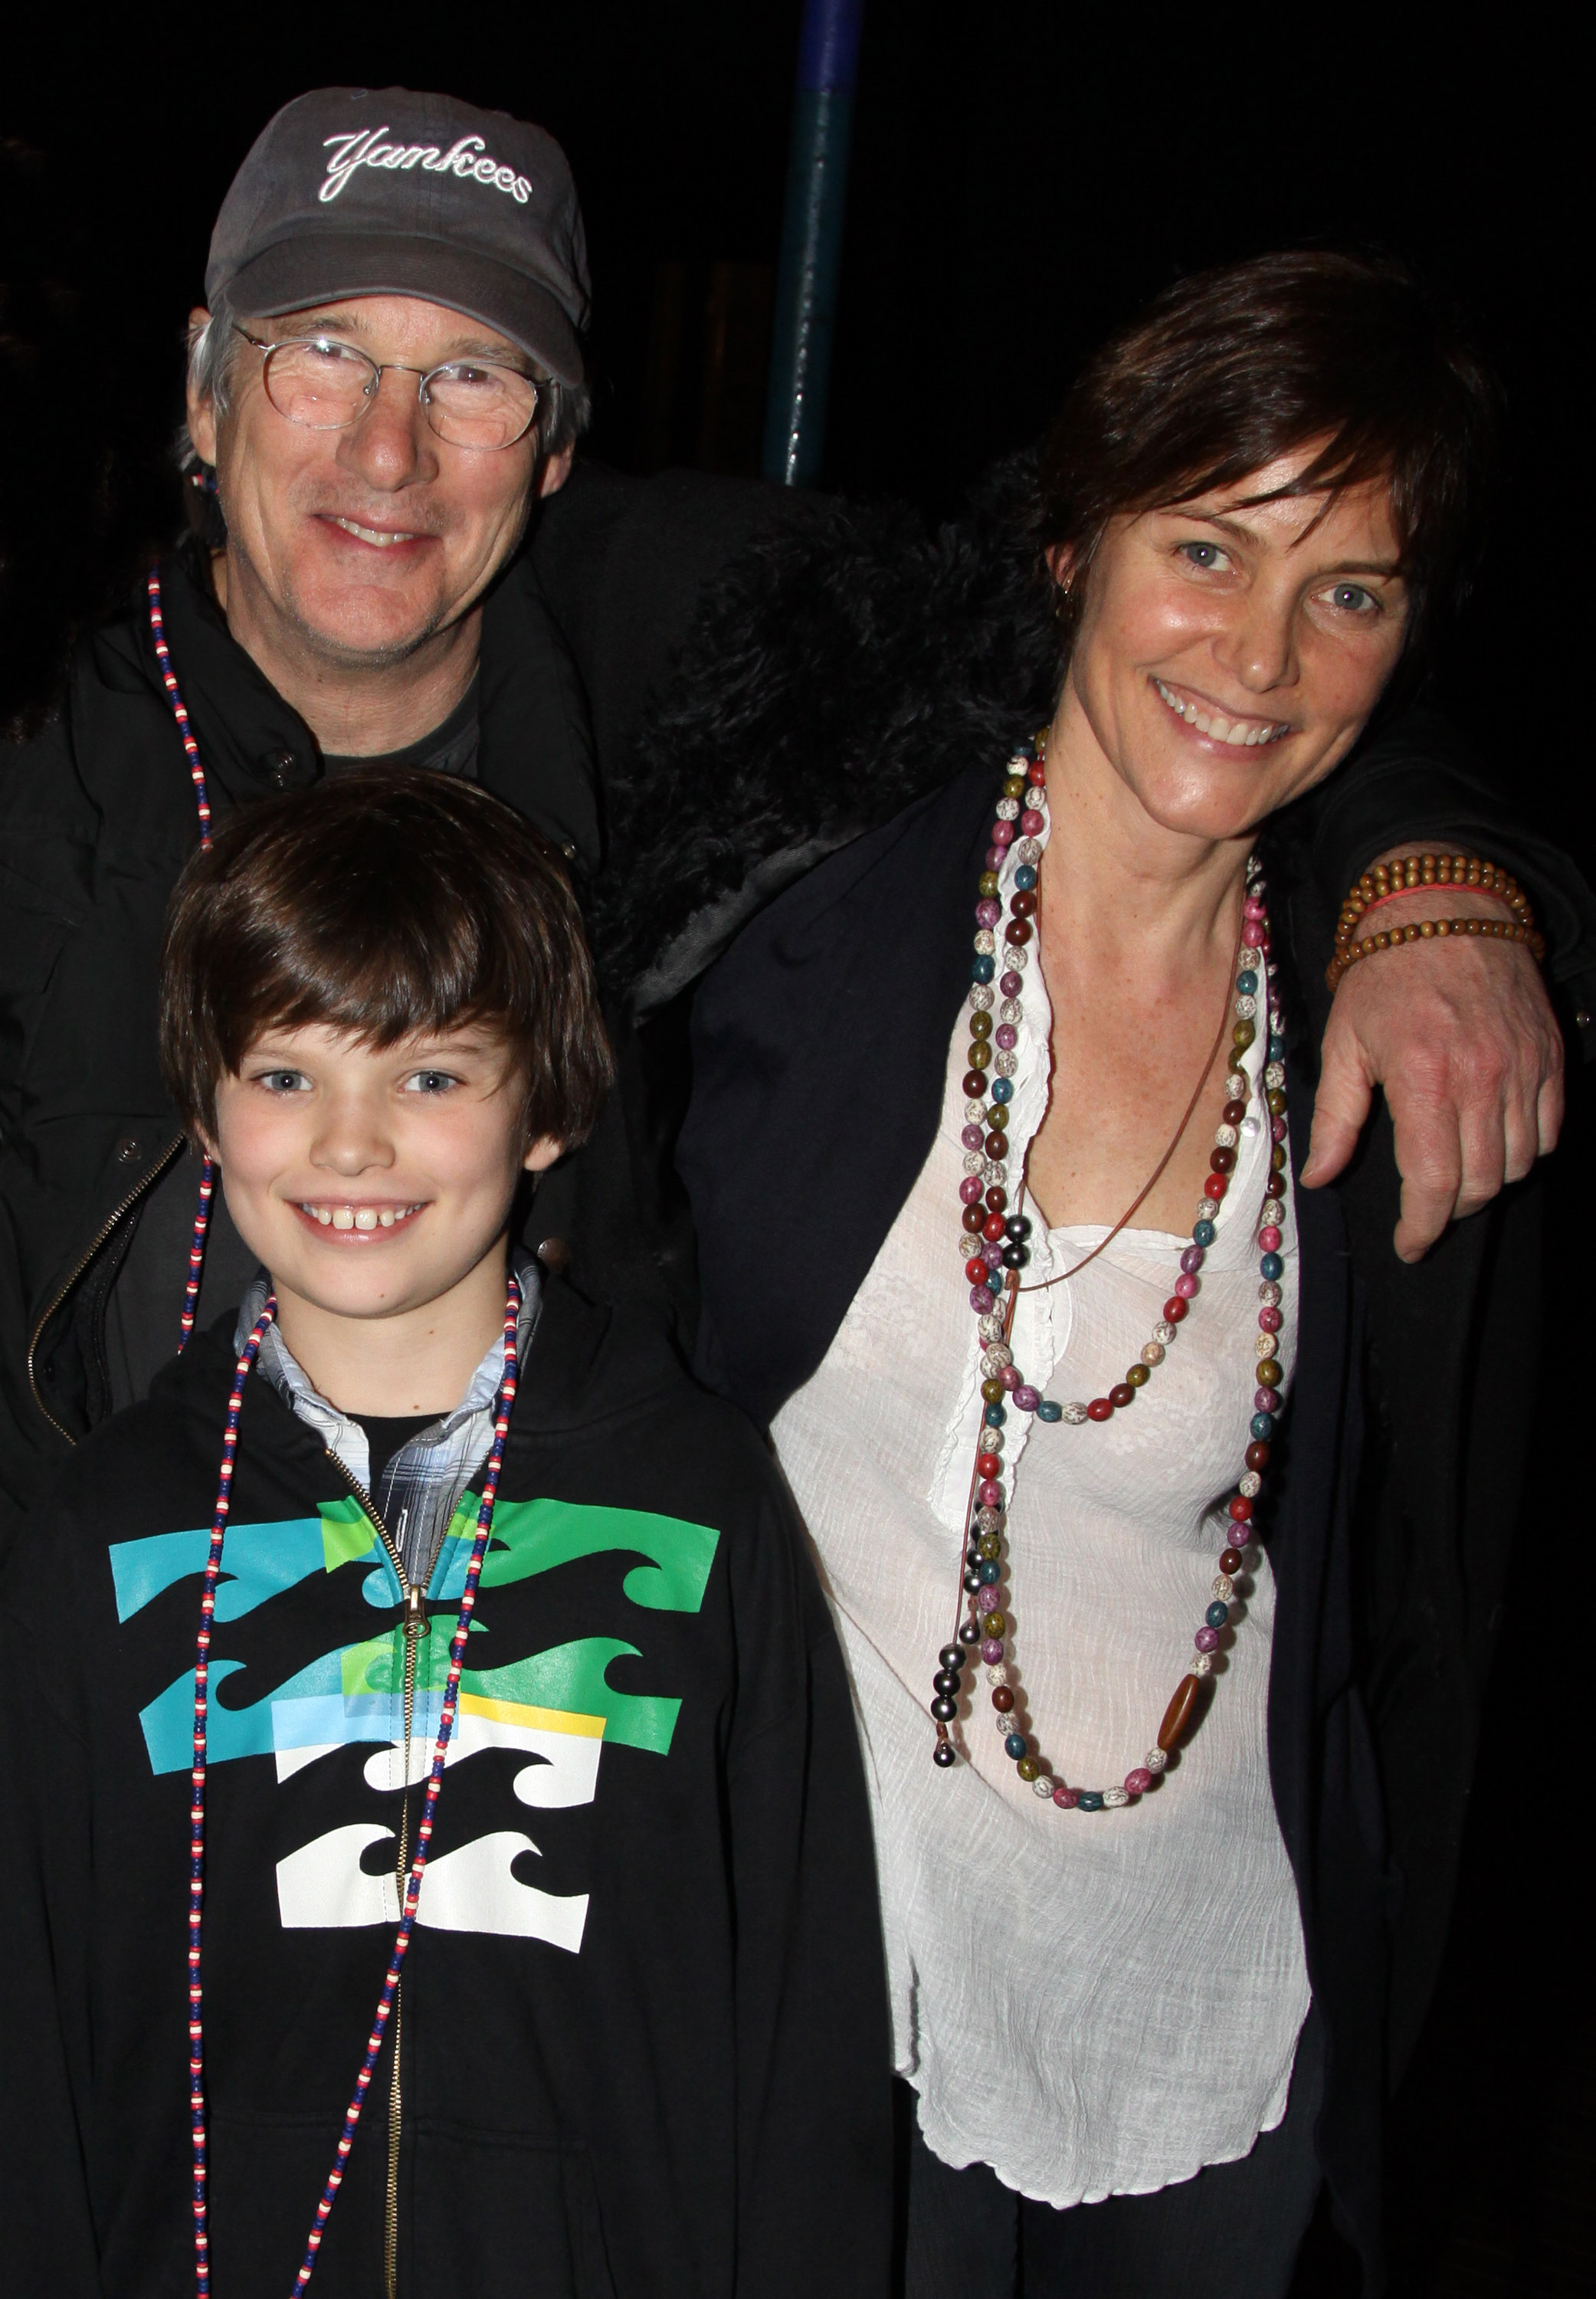 Richard Gere, Homer James Jigme Gere, and Carey Lowell backstage at the Broadway musical "Hair" in New York City on March 14, 2010. | Source: Getty Images